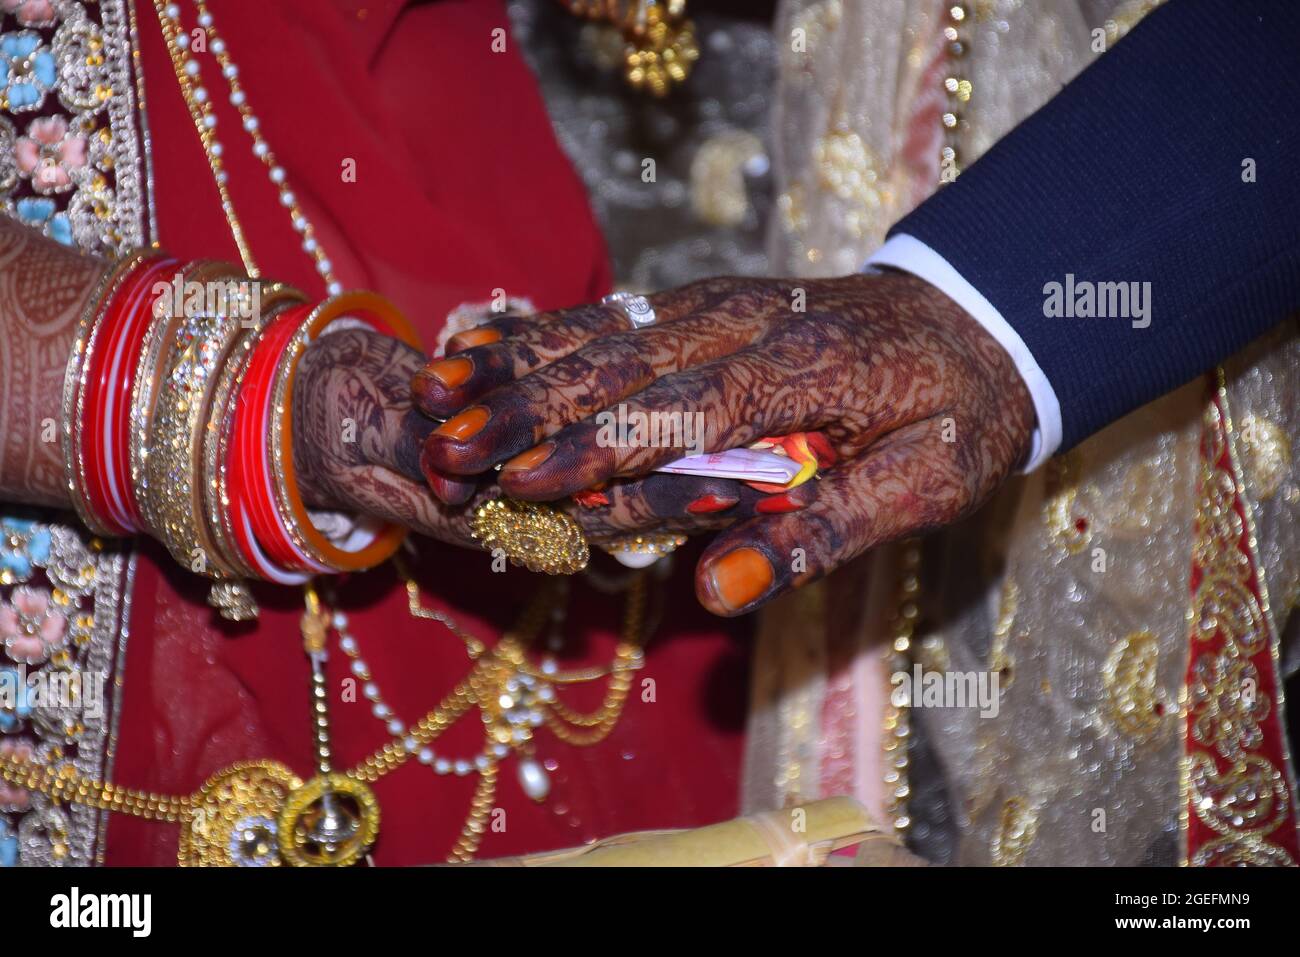 Indian Hindu Matrimonial Tradition The bride groom's hands are hand mehndi with the hands of the groom Hindu groom. Stock Photo